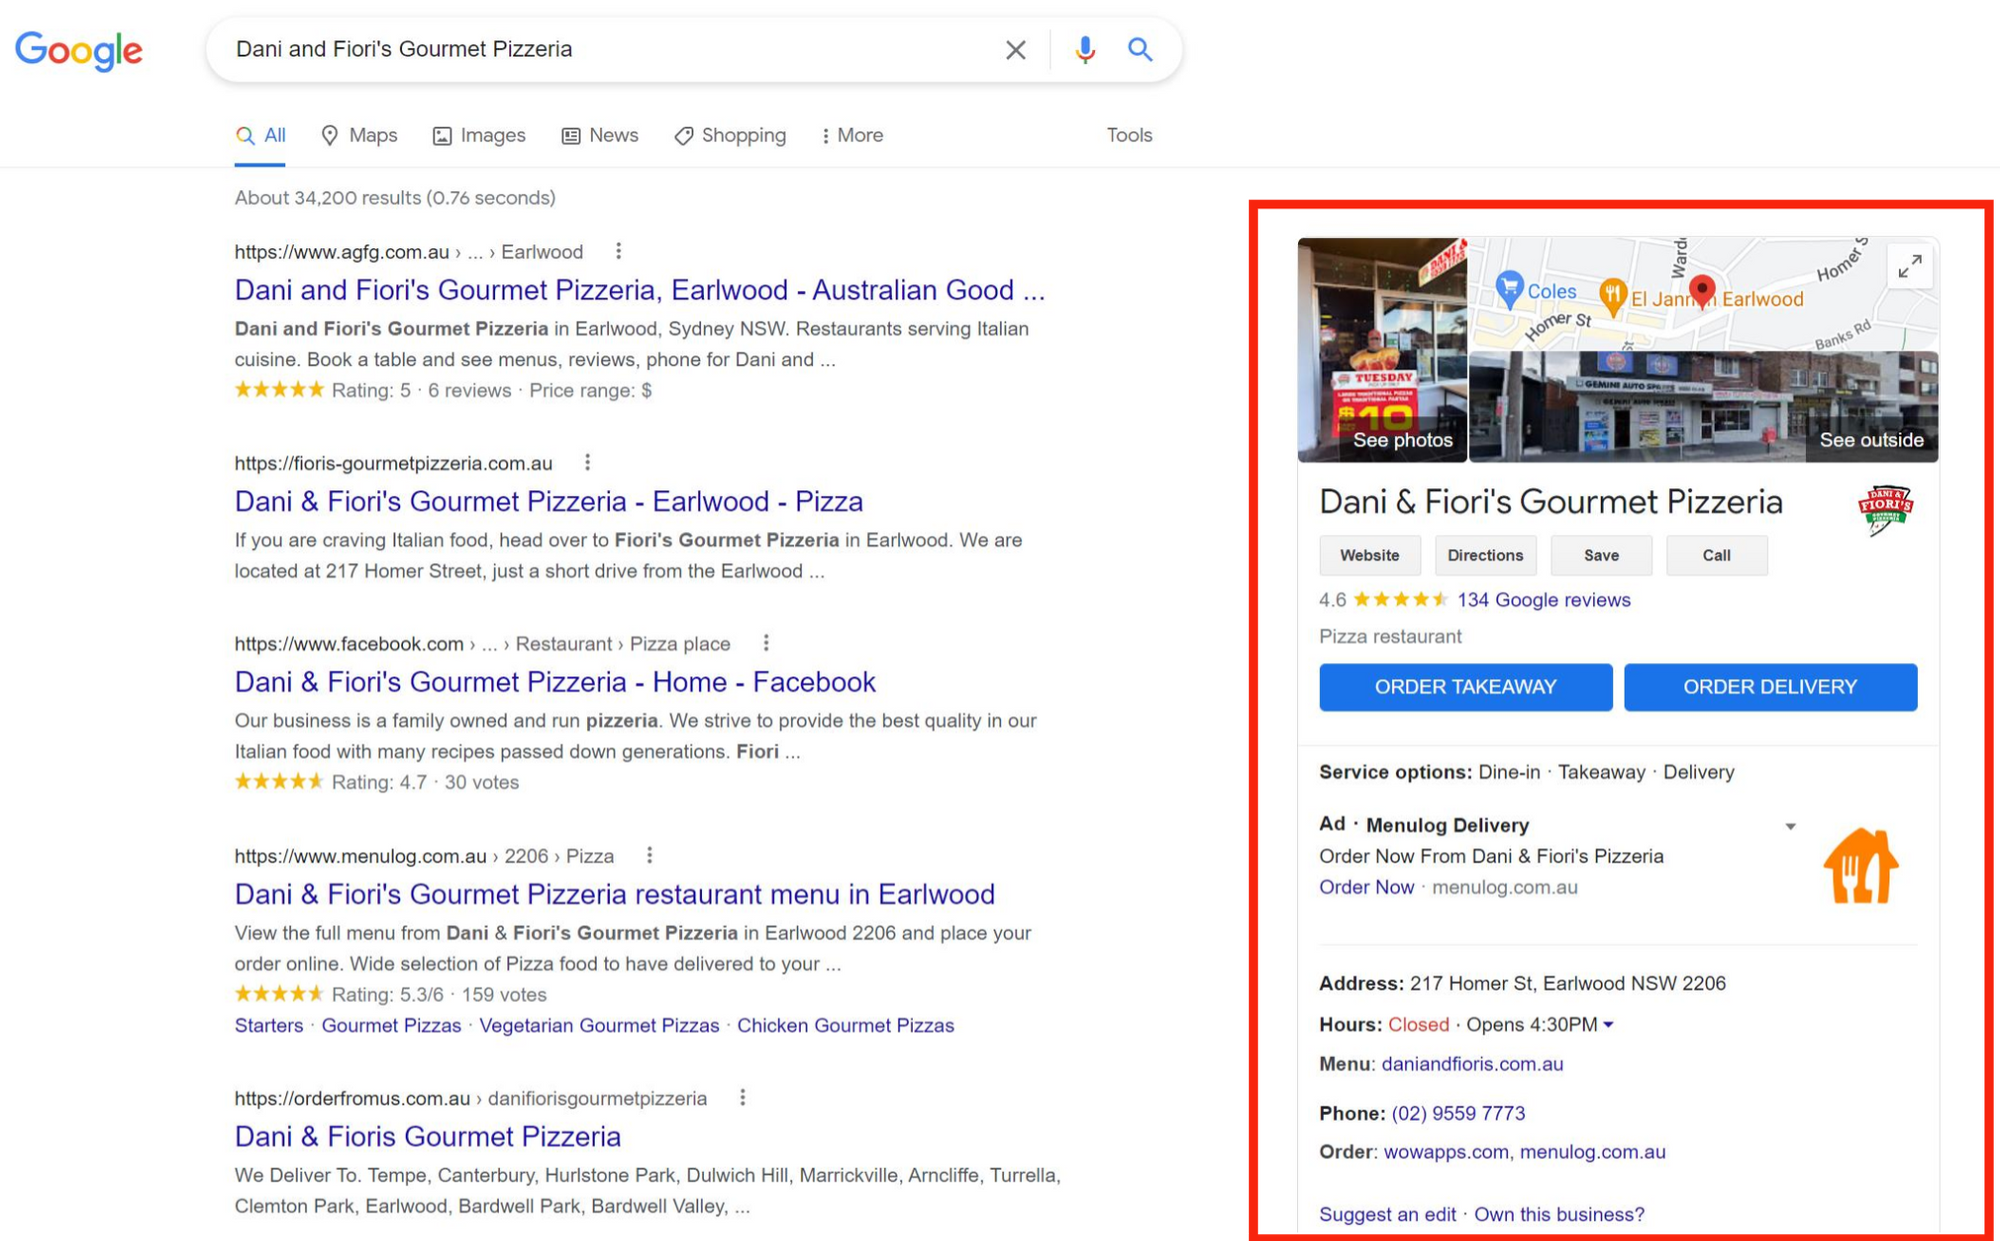 Detailed information to the right of a Google search of a business: Dani and Fiori's Gourmet Pizzeria